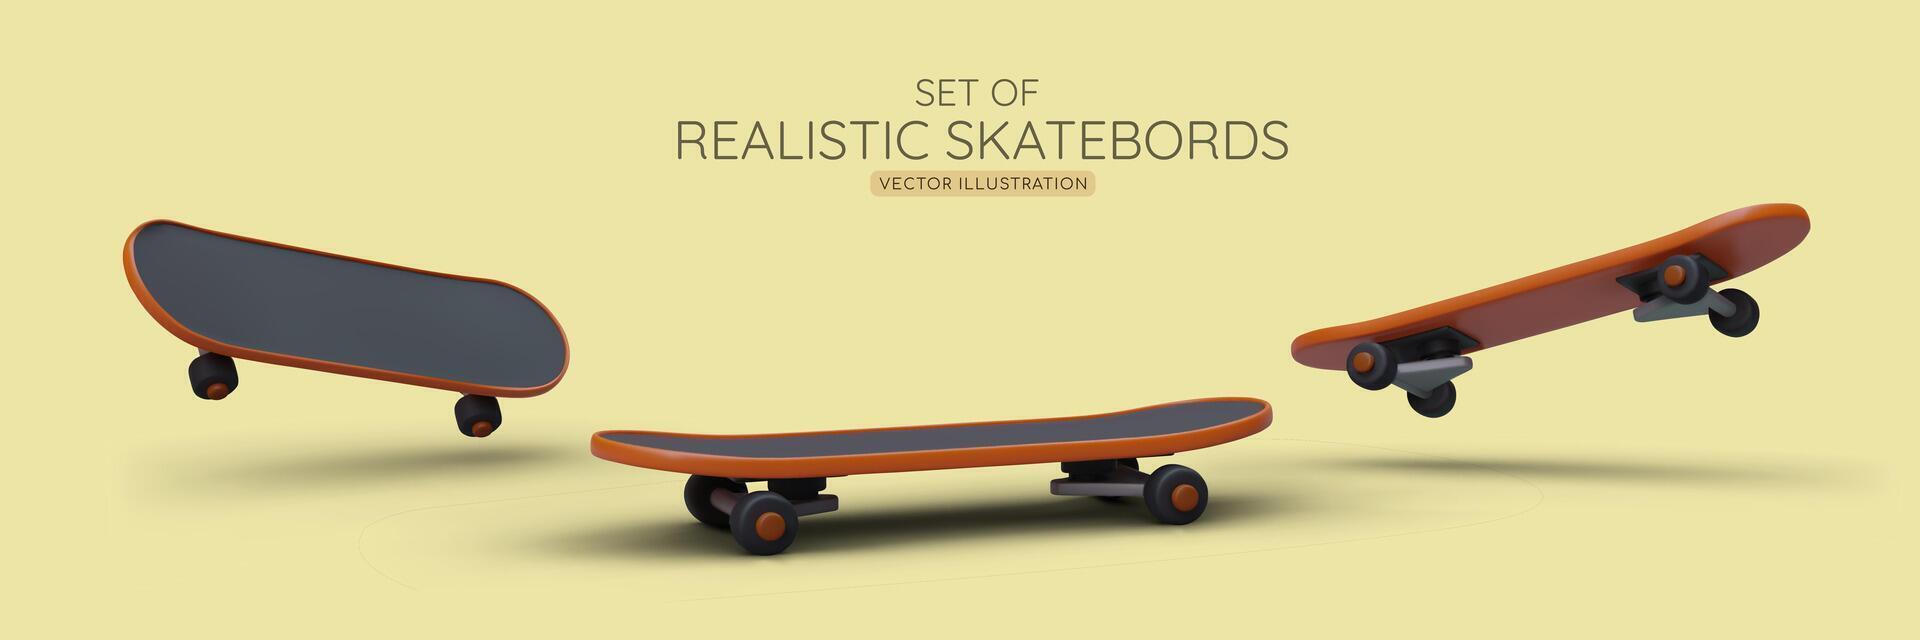 Set of realistic skateboards. 3D illustration with shadow vector